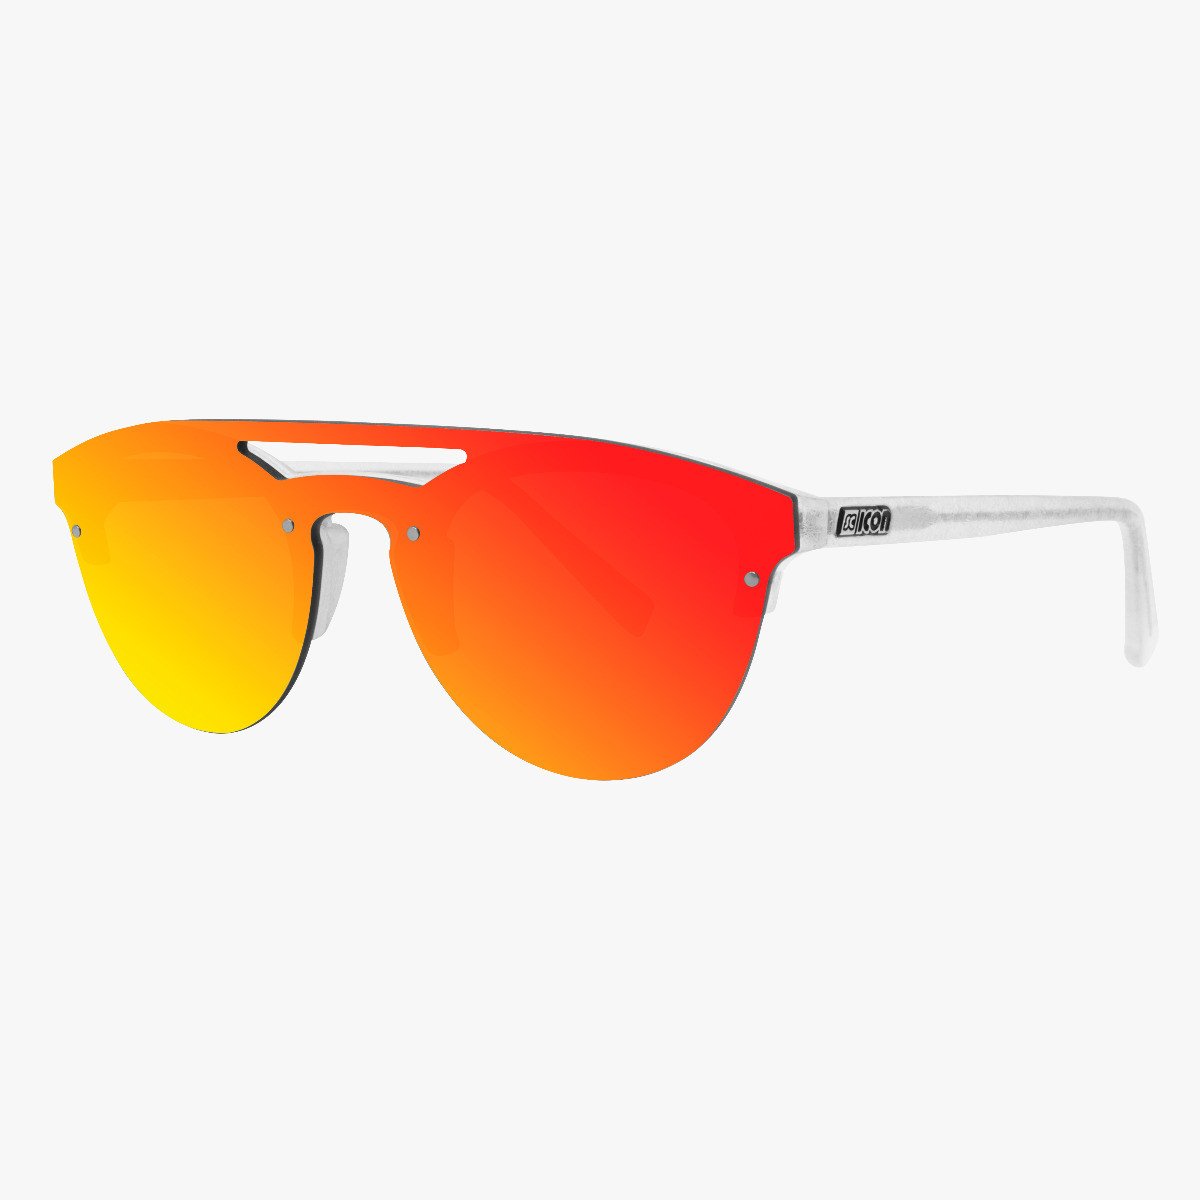 Scicon Sports | Cover Lifestyle Unisex Sunglasses - Frozen Frame, Red Lens - EY160605